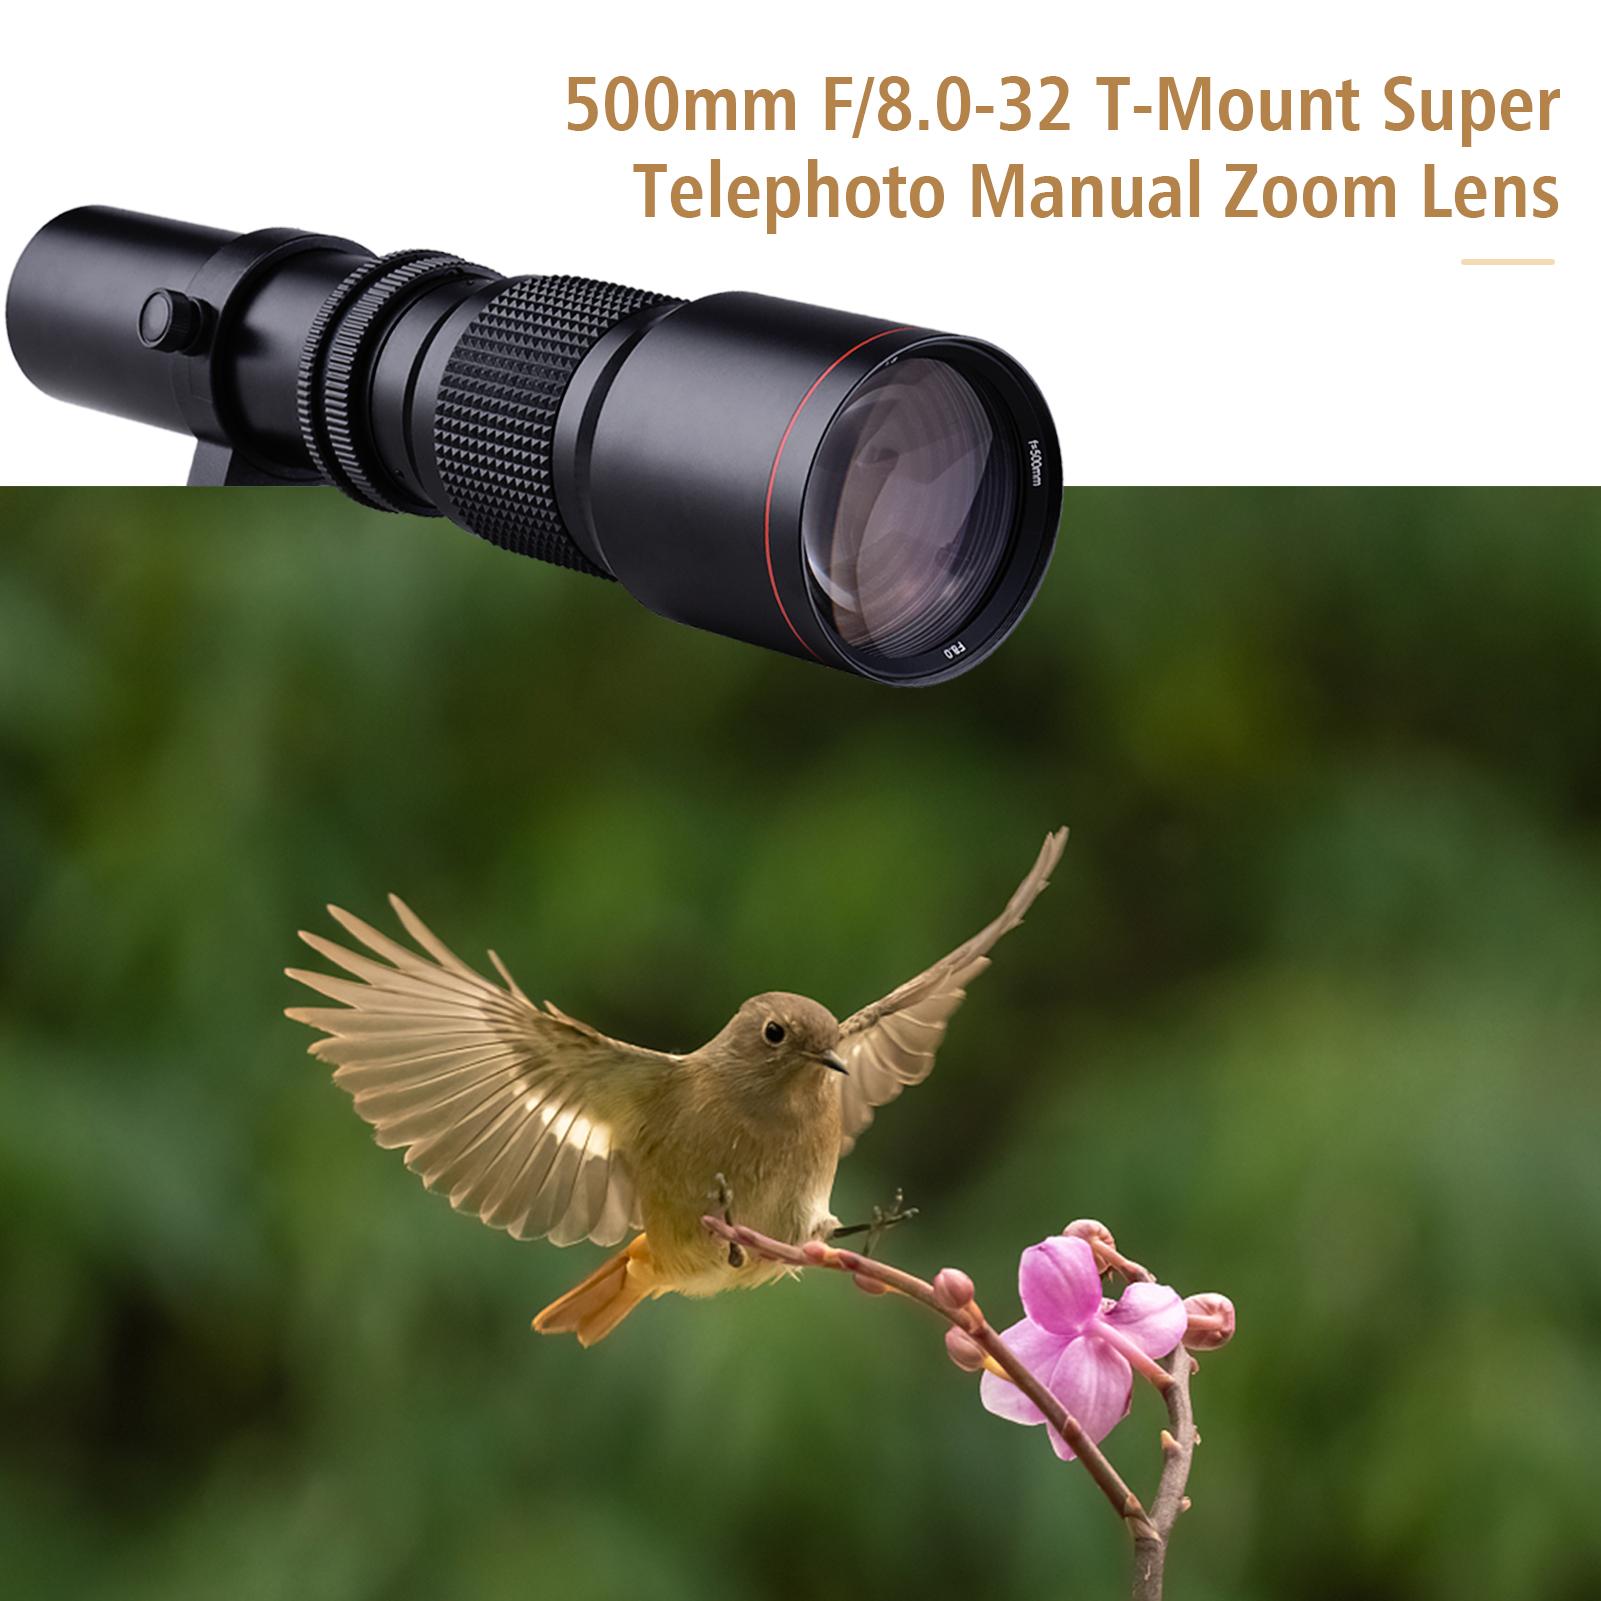 500mm F/8.0-32 Multi Coated Super Telephoto Lens Manual Zoom + T-Mount to A-Mount Adapter Ring Kit Replacement for Sony